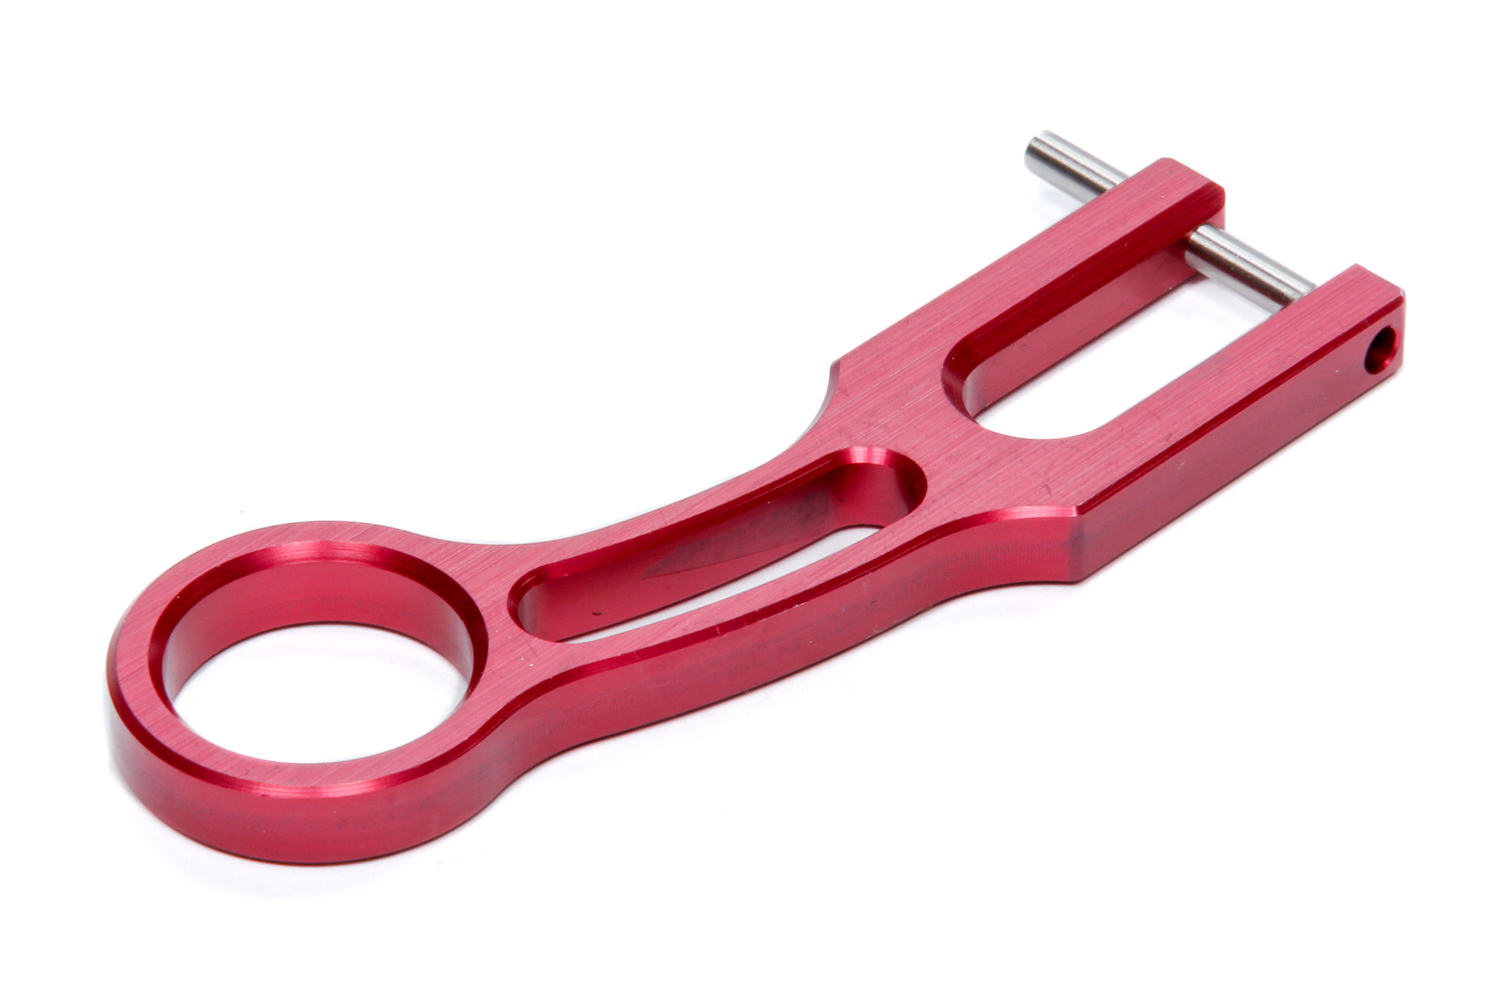 Sweet Manufacturing 331-44007 Wing Valve Handle, Aluminum, Red Anodized, Sweet Wing Valve, Each